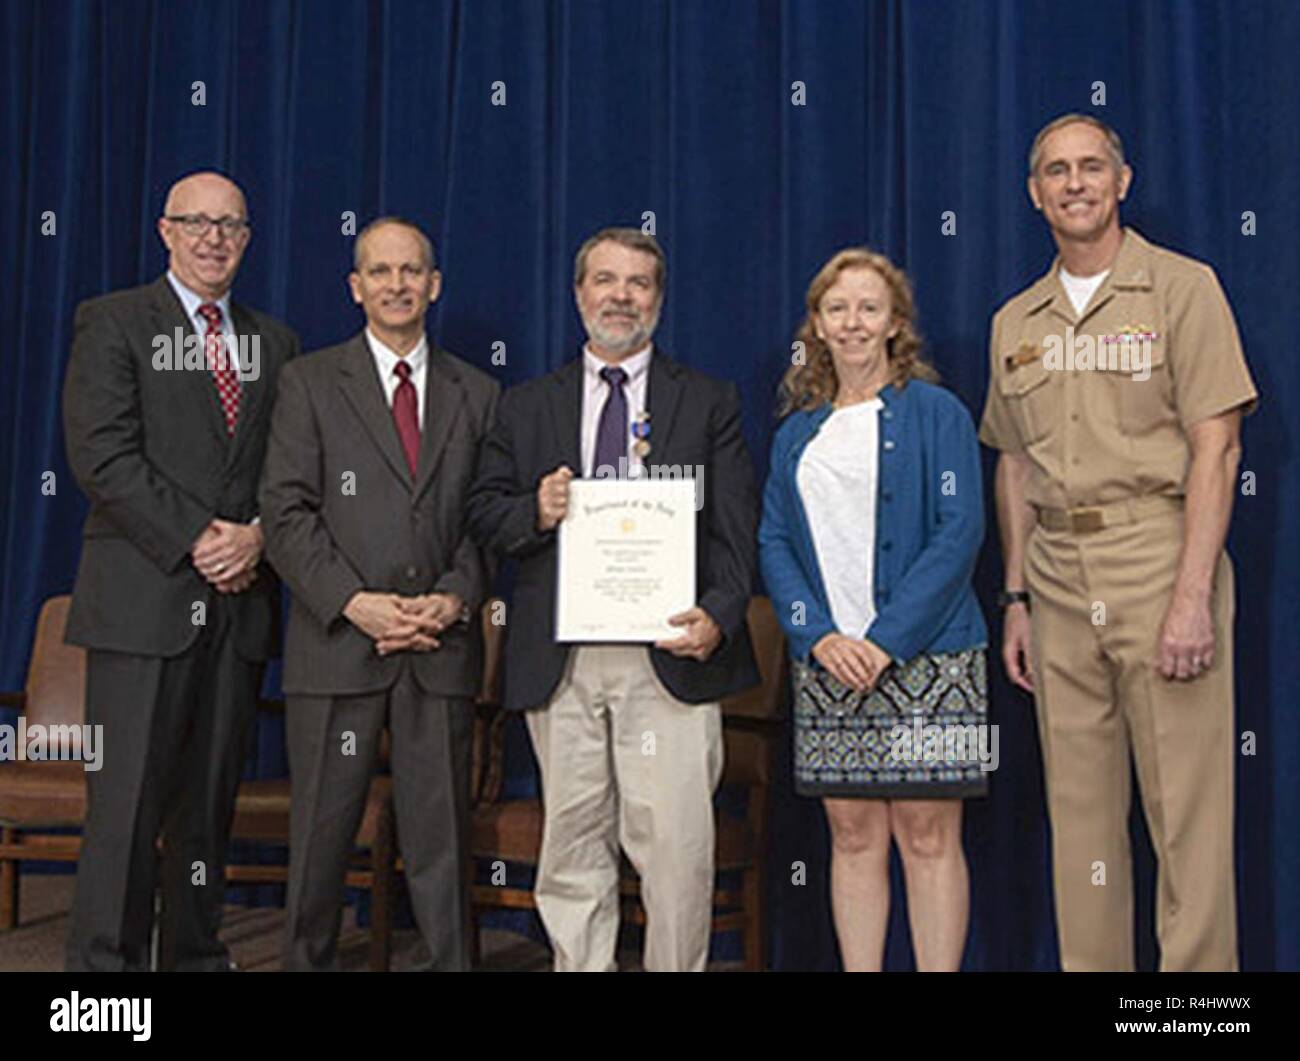 Thomas Downie (center) displays his Department of the Navy Meritorious Civilian Service Award that he received during an Oct. 1 awards ceremony. He is flanked by Donald McCormack (from left), Executive Director, Naval Surface and Undersea Warfare Centers; Ron Vien, NUWC Newport Technical Director, Thomas's wife, Deborah, and Capt. Michael Coughlin, NUWC Newport commanding officer. Stock Photo